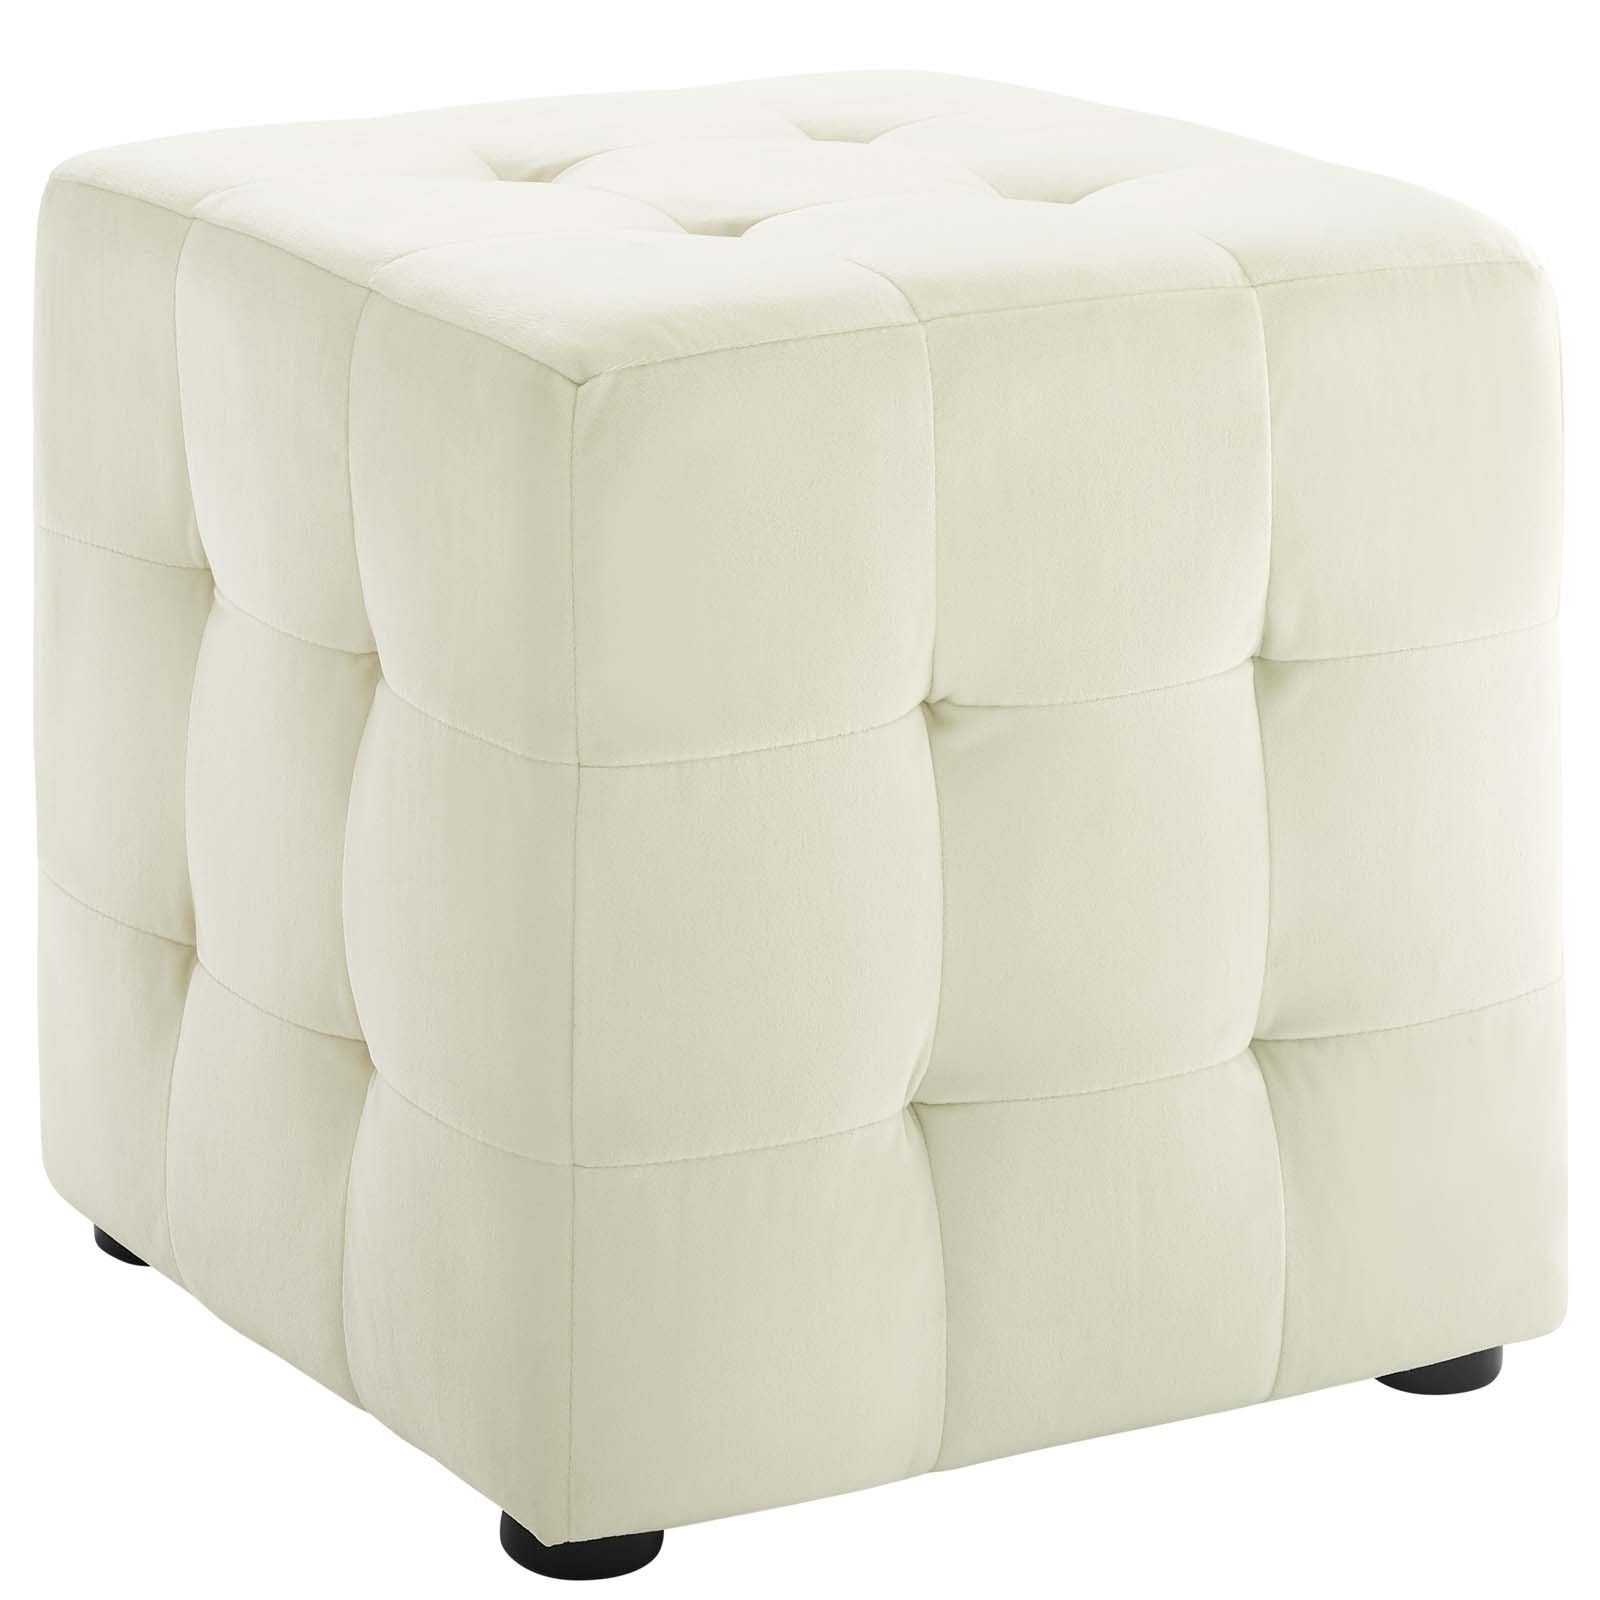 Contour Ivory Tufted Cube Performance Velvet Ottoman Eei 3577 Ivo Throughout Light Blue And Gray Solid Cube Pouf Ottomans (View 4 of 20)